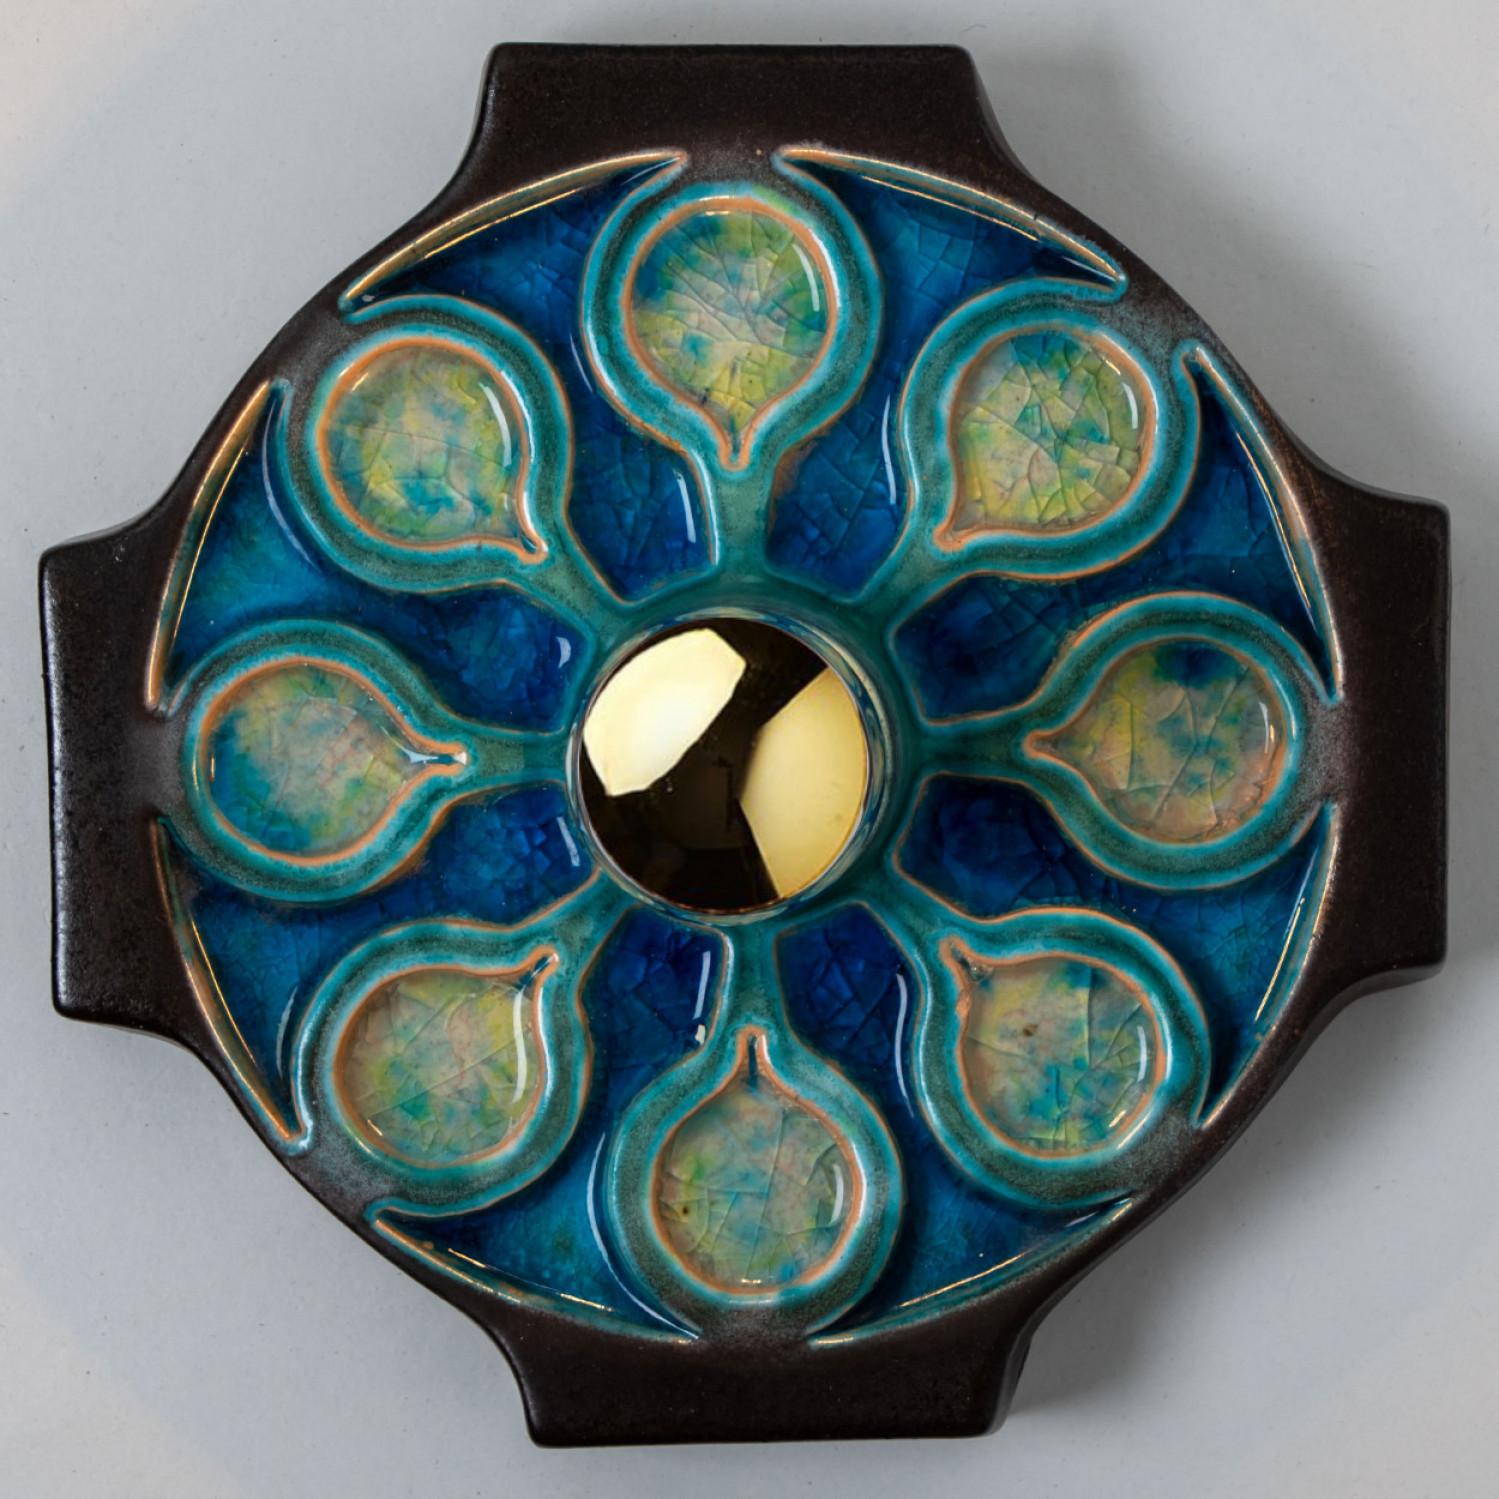 Mid-century ceramic wall light or wall sconce, made in Germany around 1960's.
The light is made of ceramic and decorated and glazed in blue toned colors.

Different effects can be achieved by fitting different light bulbs, pygmy clear or amber